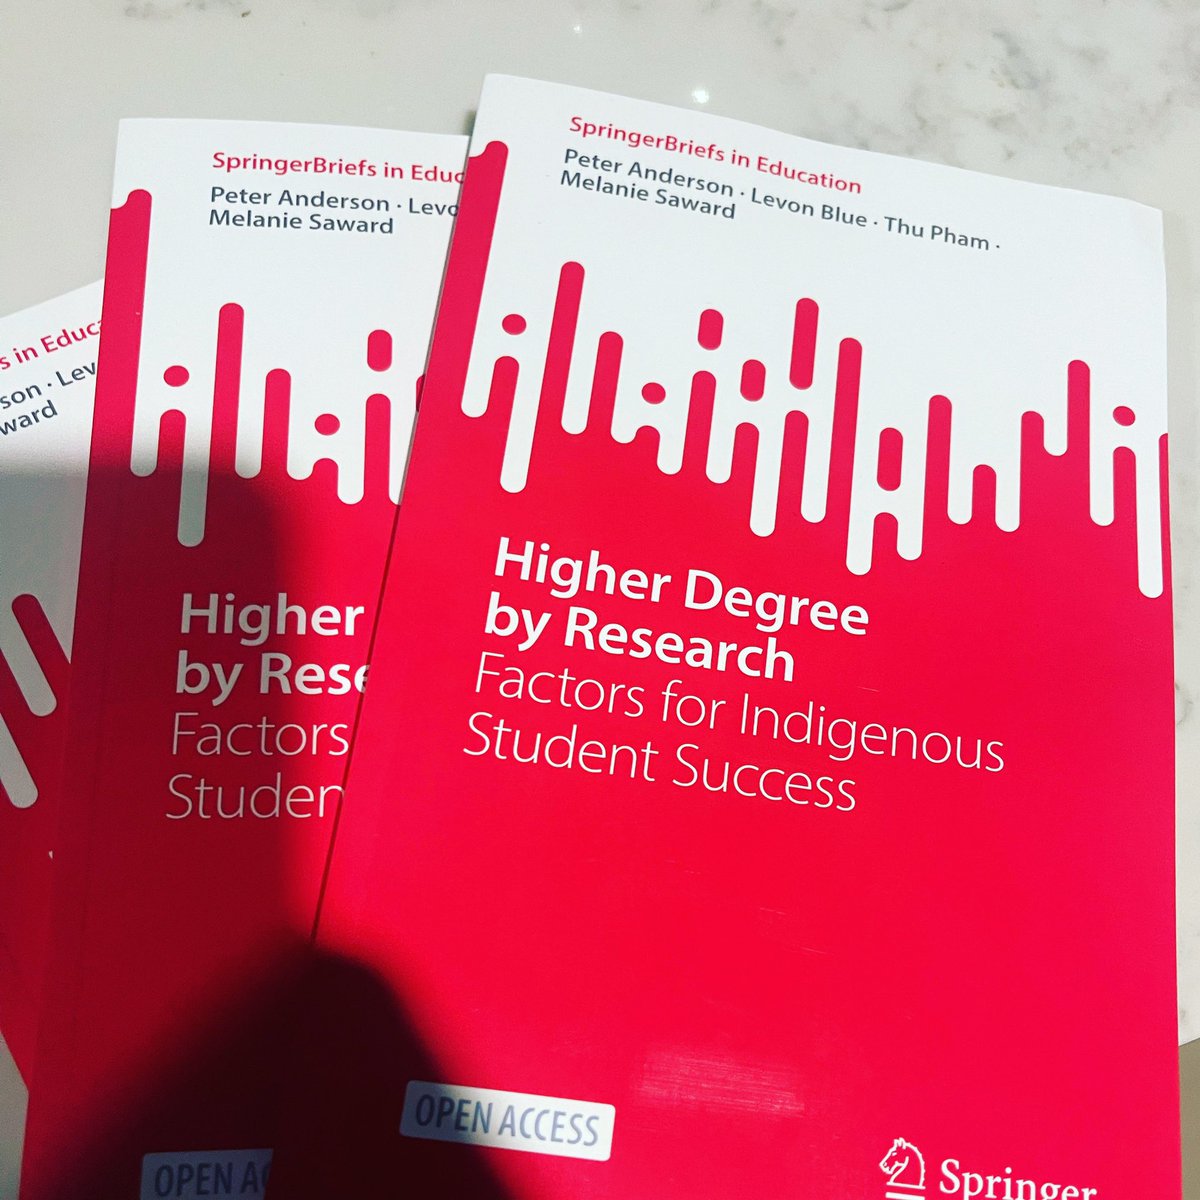 As a black PhD student Never ever thought I would have 2 books years later. #indigenoused @AAREBlog @AERA_EdResearch @ATEA_Australia #rightsbasedwsucation #